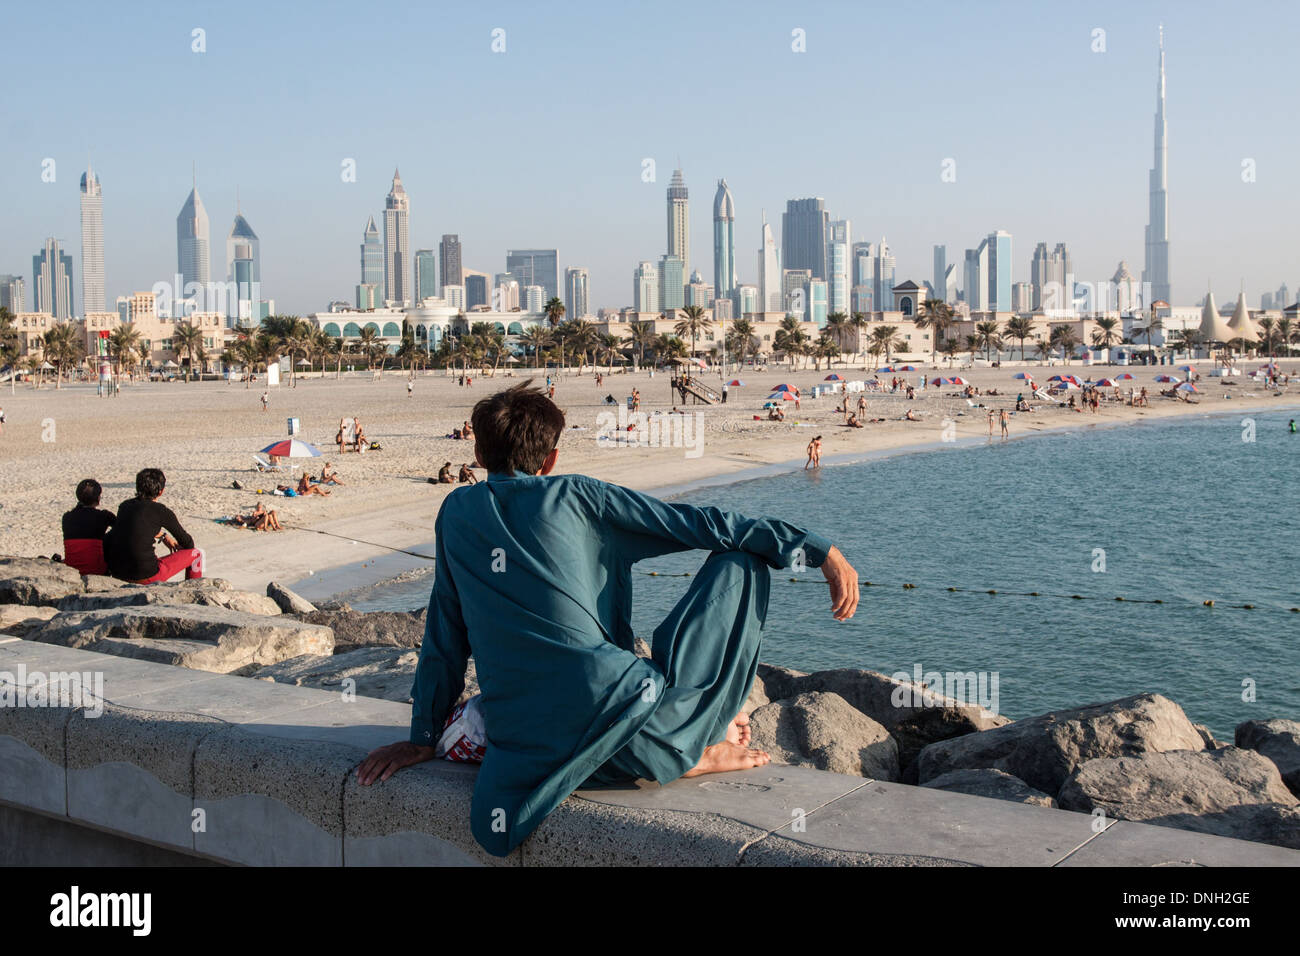 MAN LOOKING AT THE BEACH AND THE SKYLINE OF SHEIKH ZAYED ROAD WITH THE FINANCIAL CENTER AND DOWNTOWN DUBAI DOMINATD BY THE BURJ KHALIFA TOWER, ONCE KNOWN AS BURJ DUBAI, DUBAI, UNITED ARAB EMIRATES, MIDDLE EAST Stock Photo